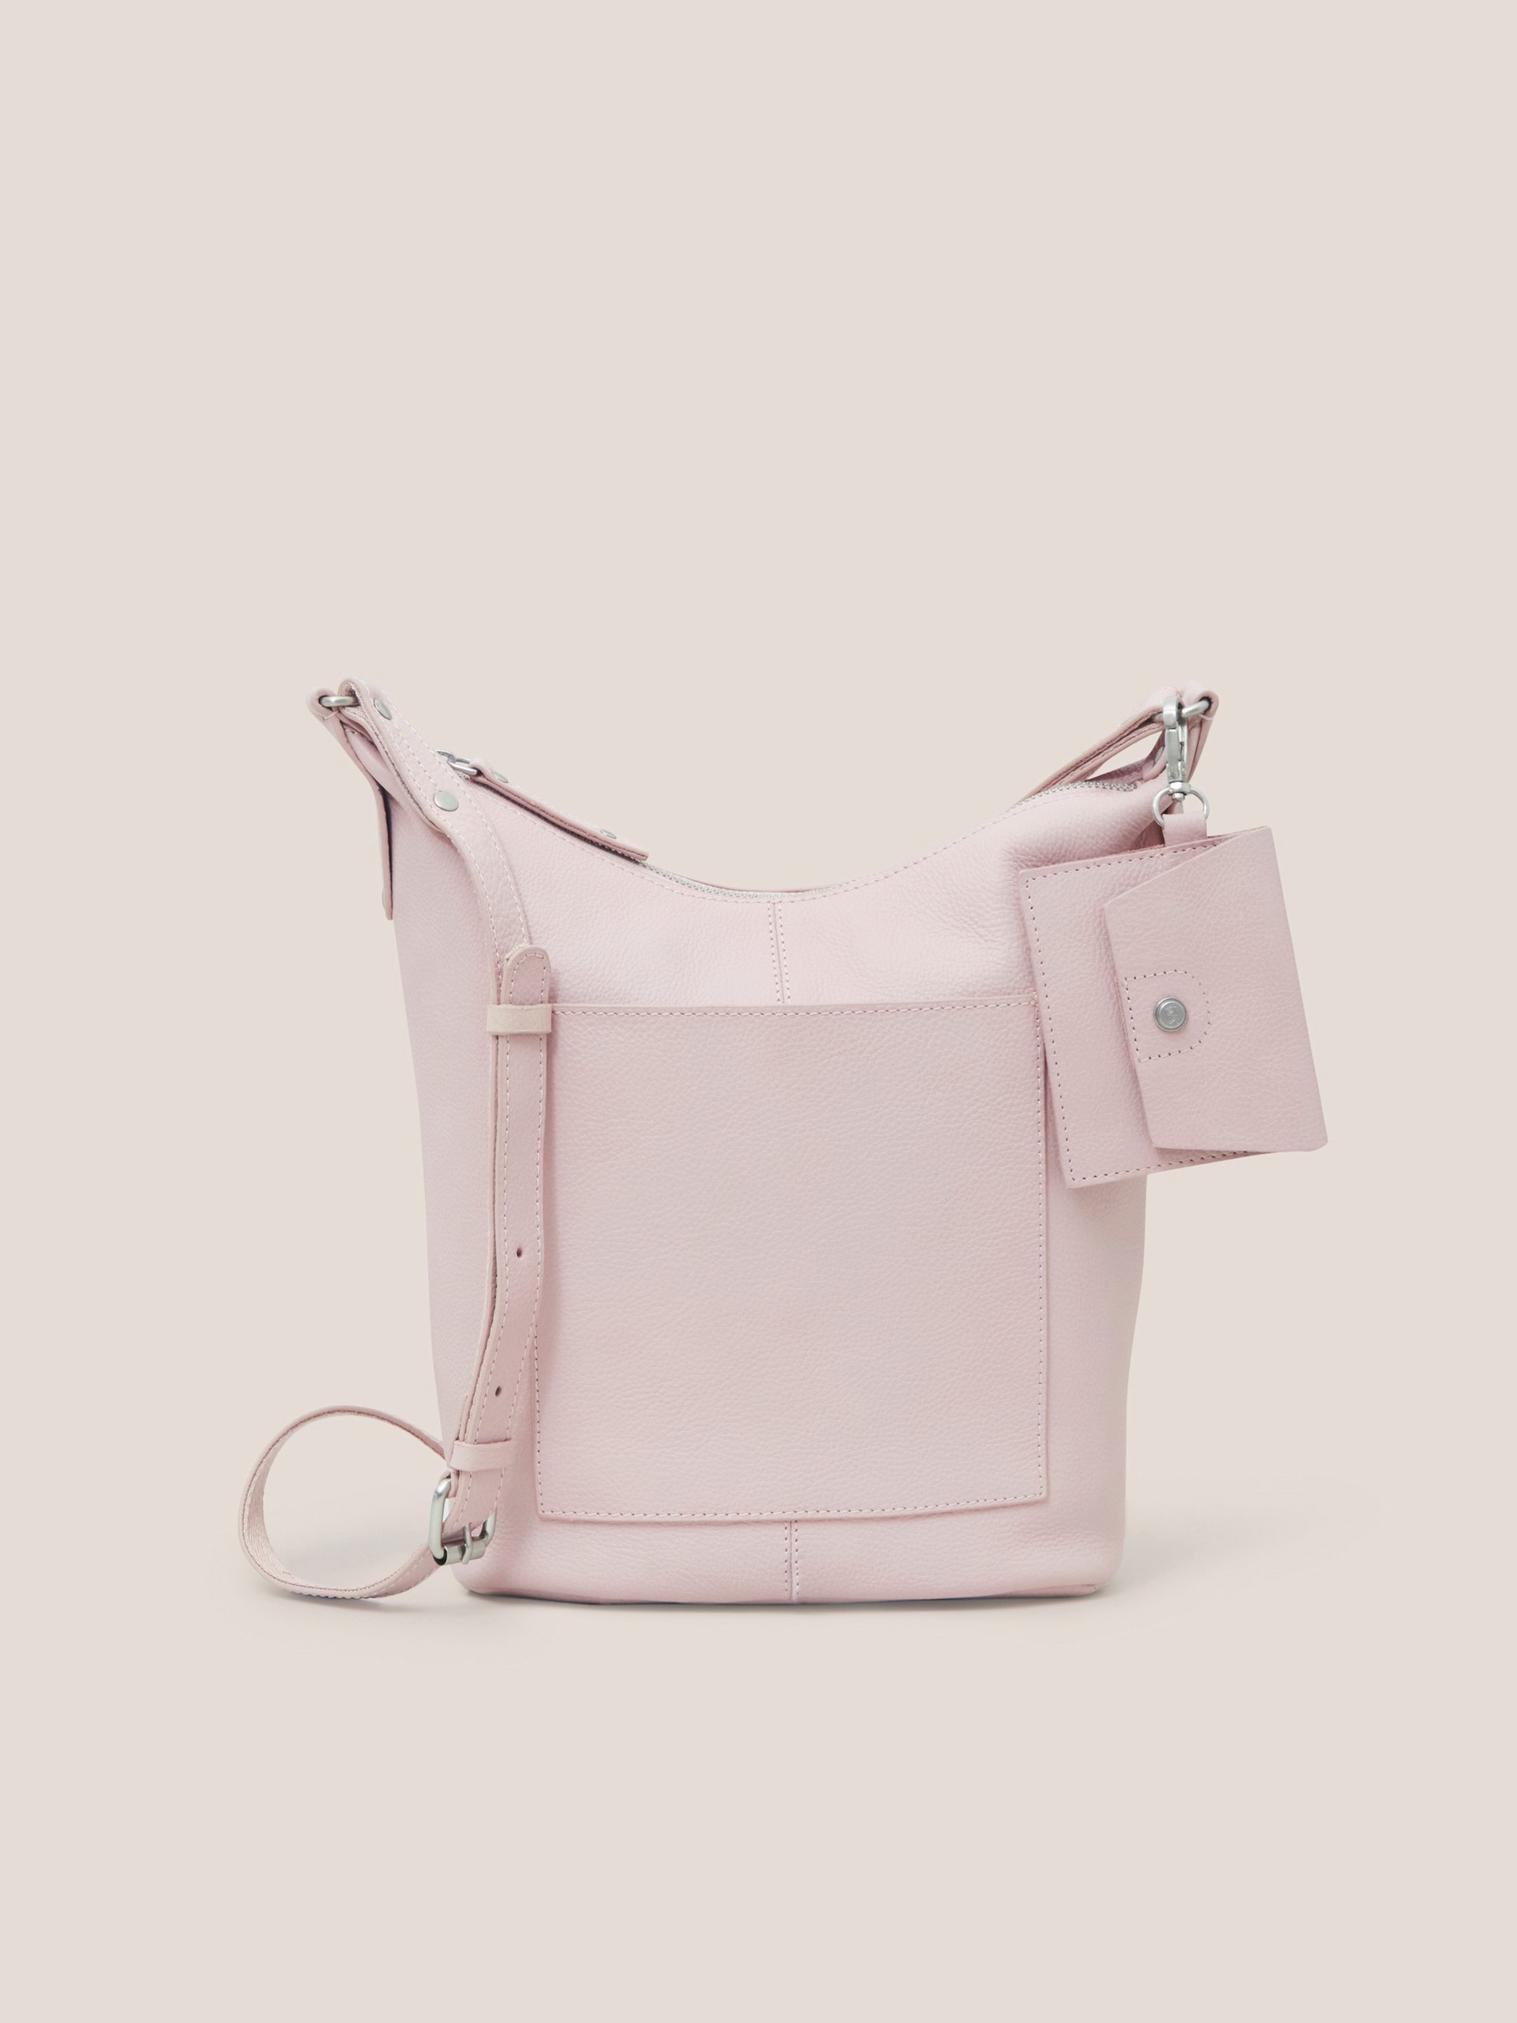 Fern Leather Crossbody in LGT PINK - MODEL FRONT